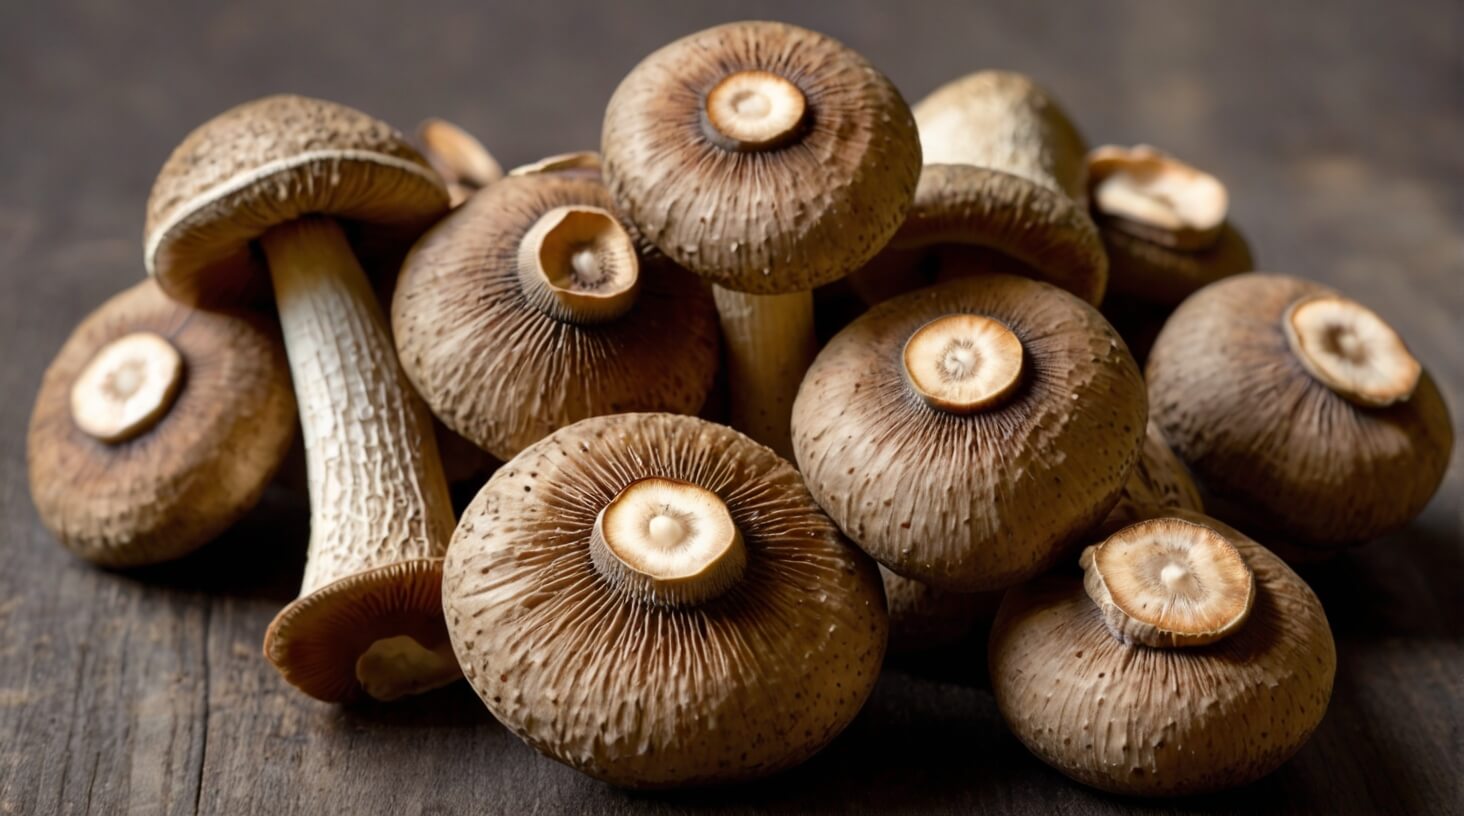 A close-up image of fresh shiitake mushrooms arranged on a wooden surface, showcasing the benefits of incorporating shiitake mushrooms into your diet for improved health and culinary enjoyment.